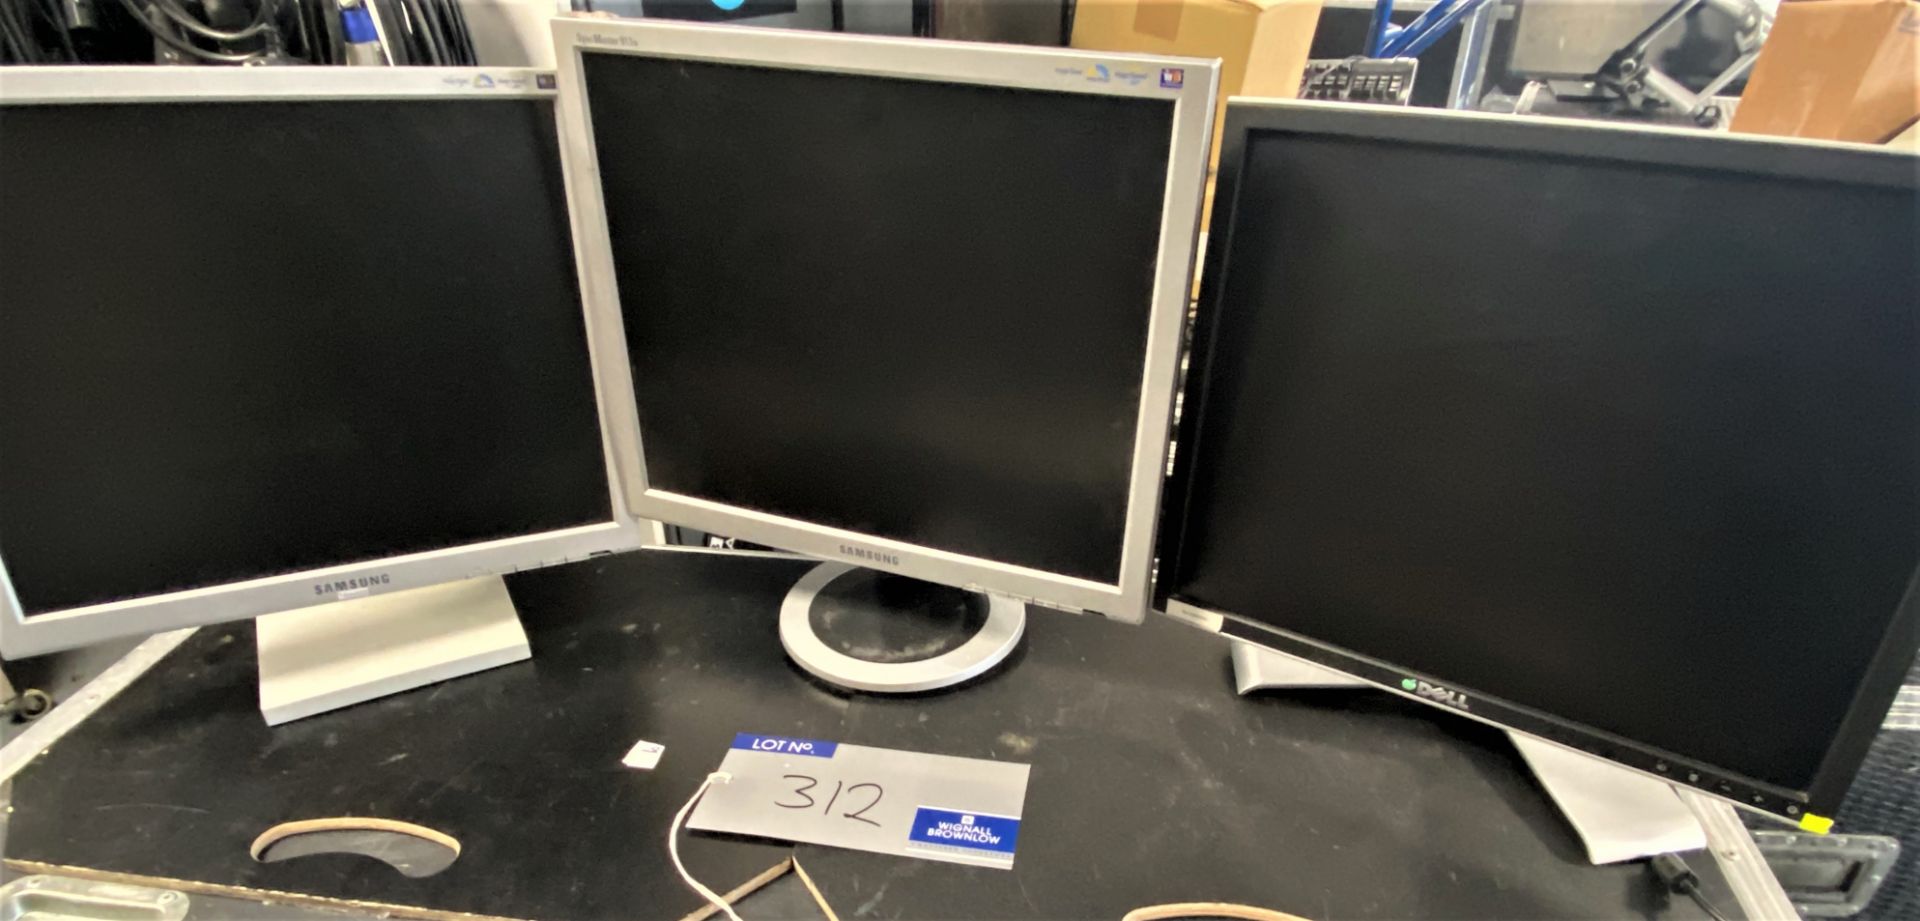 3 Monitors, 2 Samsung SyncMaster 913N, 1 Dell (previously in use).